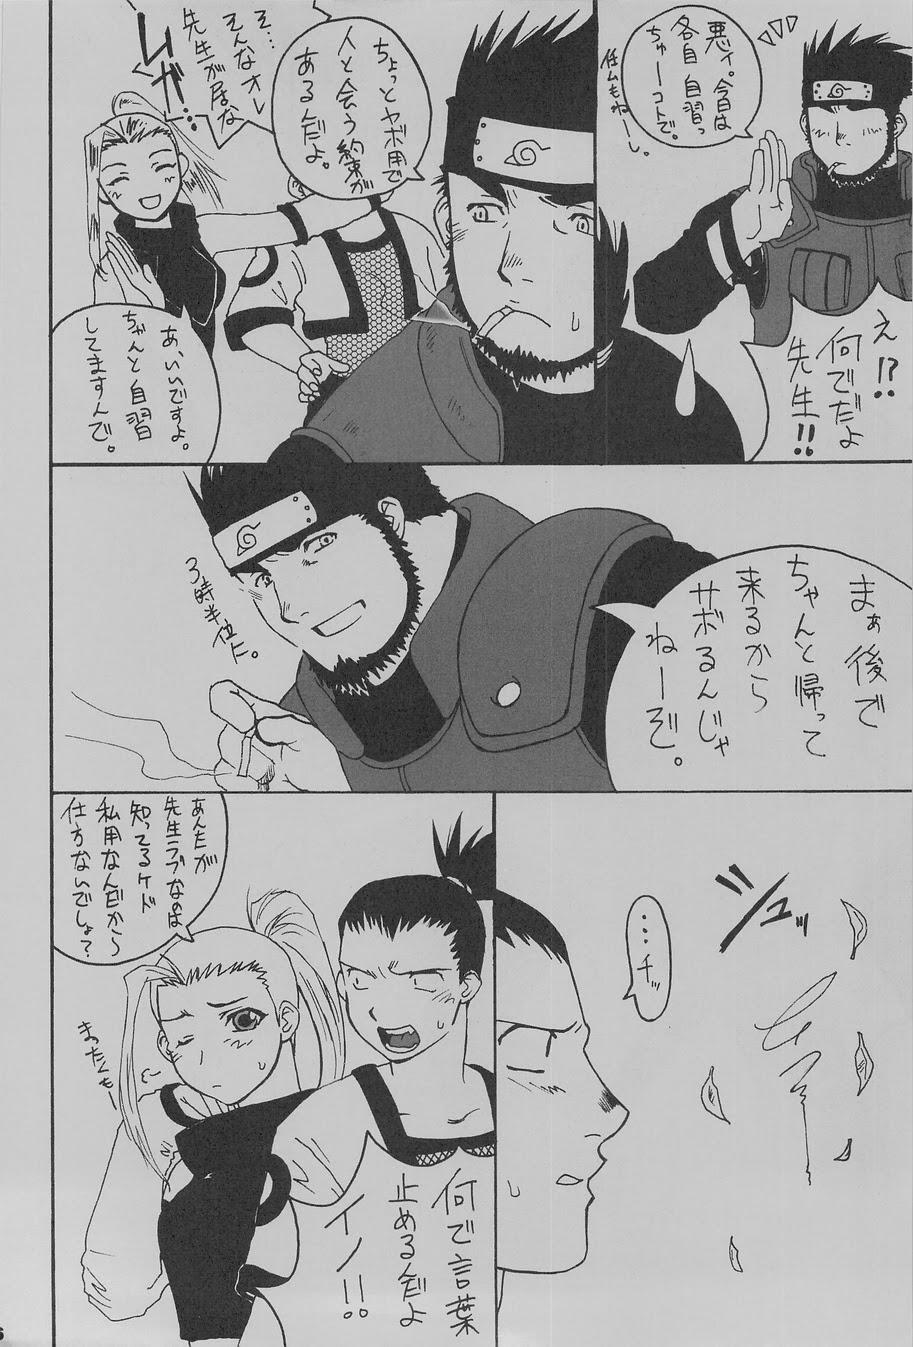 Stretch Ka - it happened in the distant past - Naruto Fullmetal alchemist Gunparade march Gag - Page 8